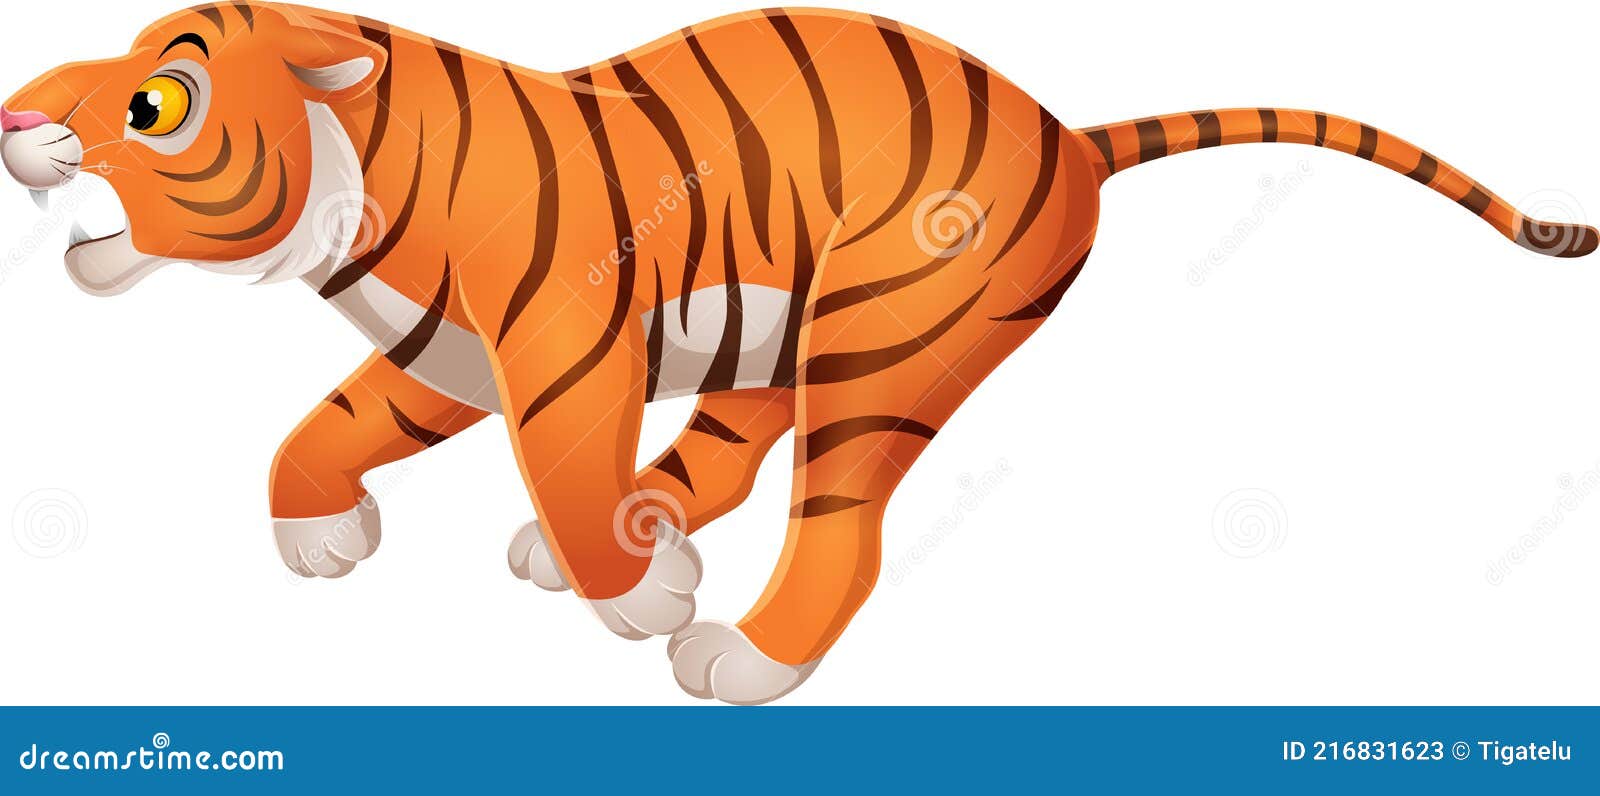 Cartoon Leaping Tiger Stock Illustrations – 41 Cartoon Leaping Tiger Stock  Illustrations, Vectors & Clipart - Dreamstime